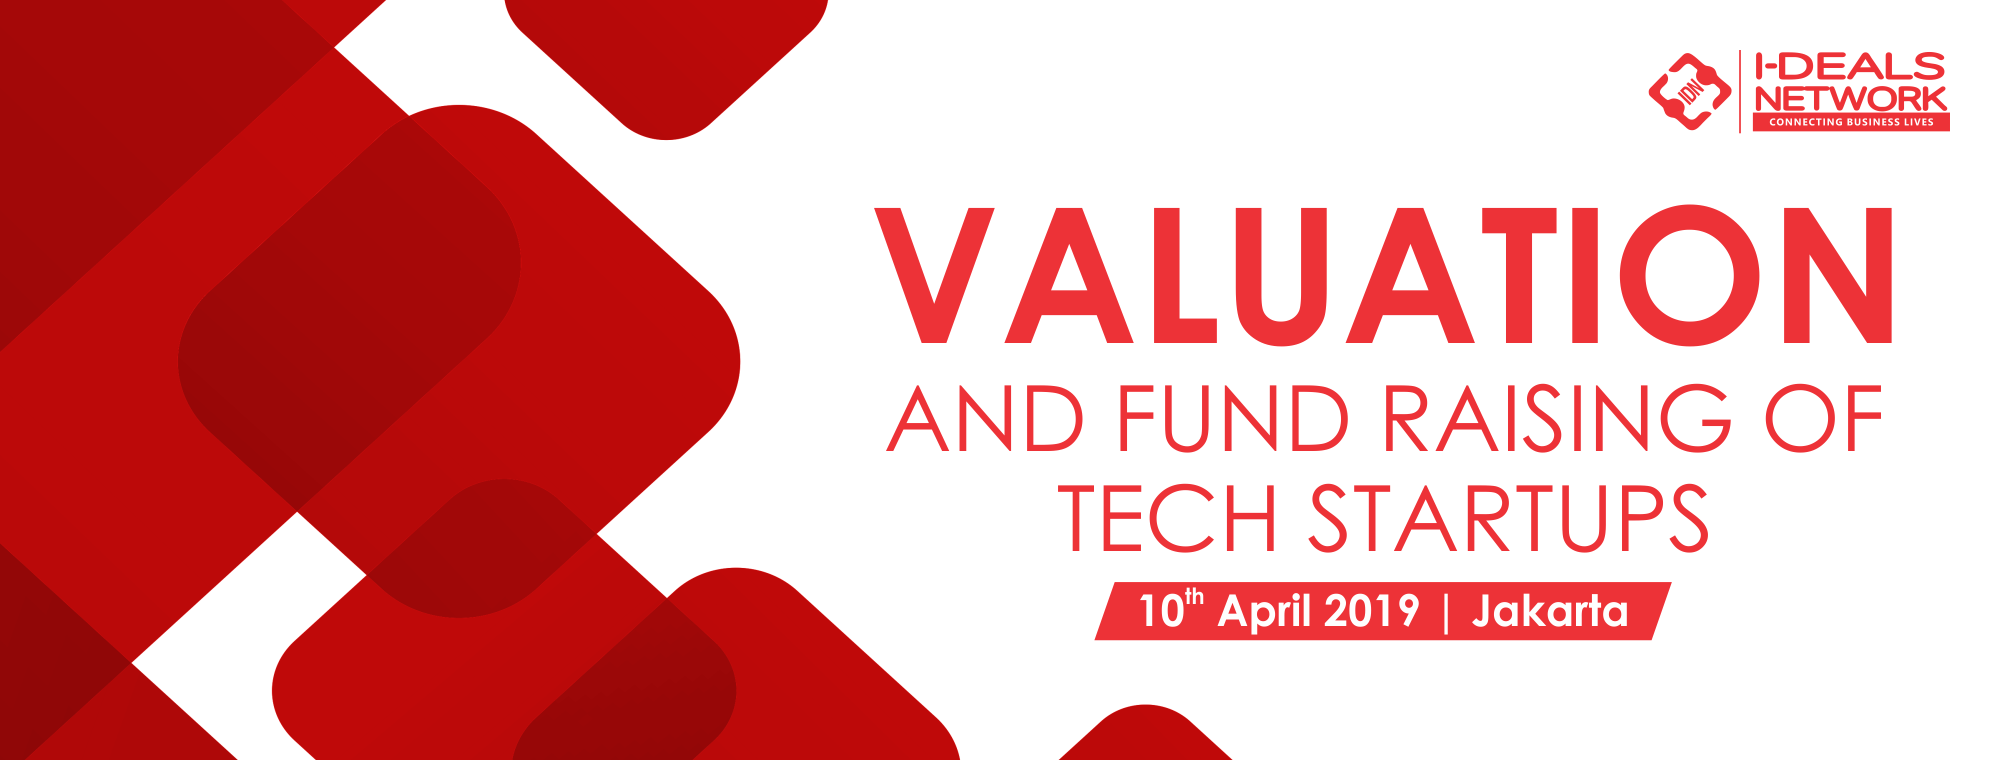 Valuation and Fundraising of Techstartups